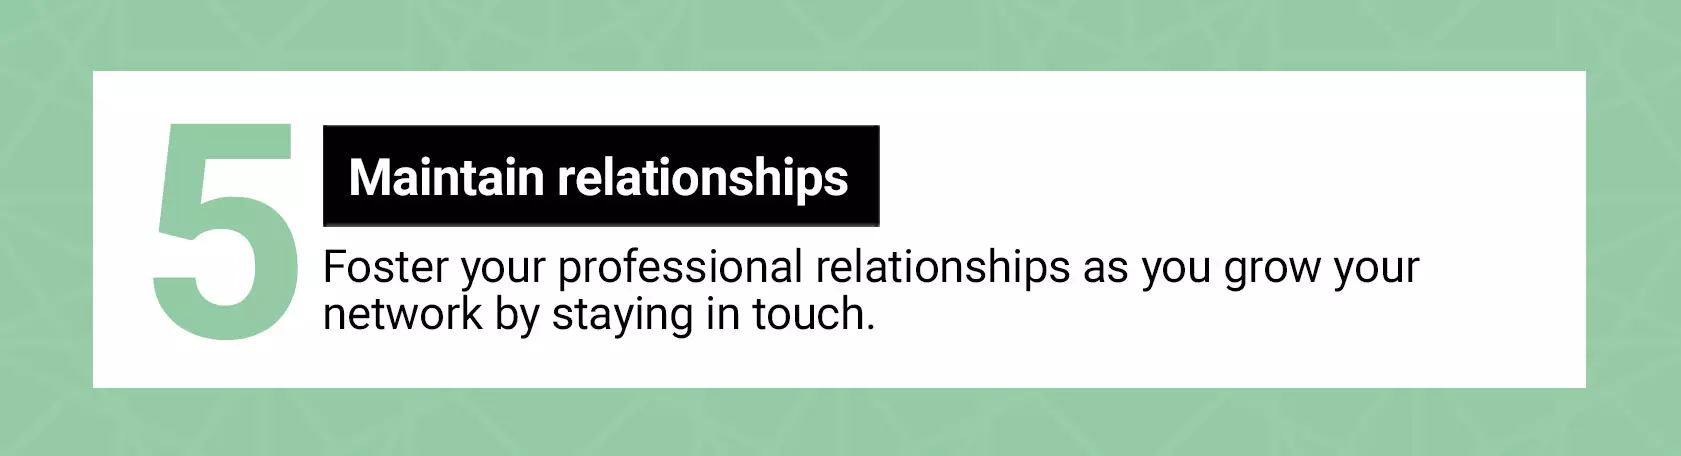 Step 5: Maintain relationships as you grow your network